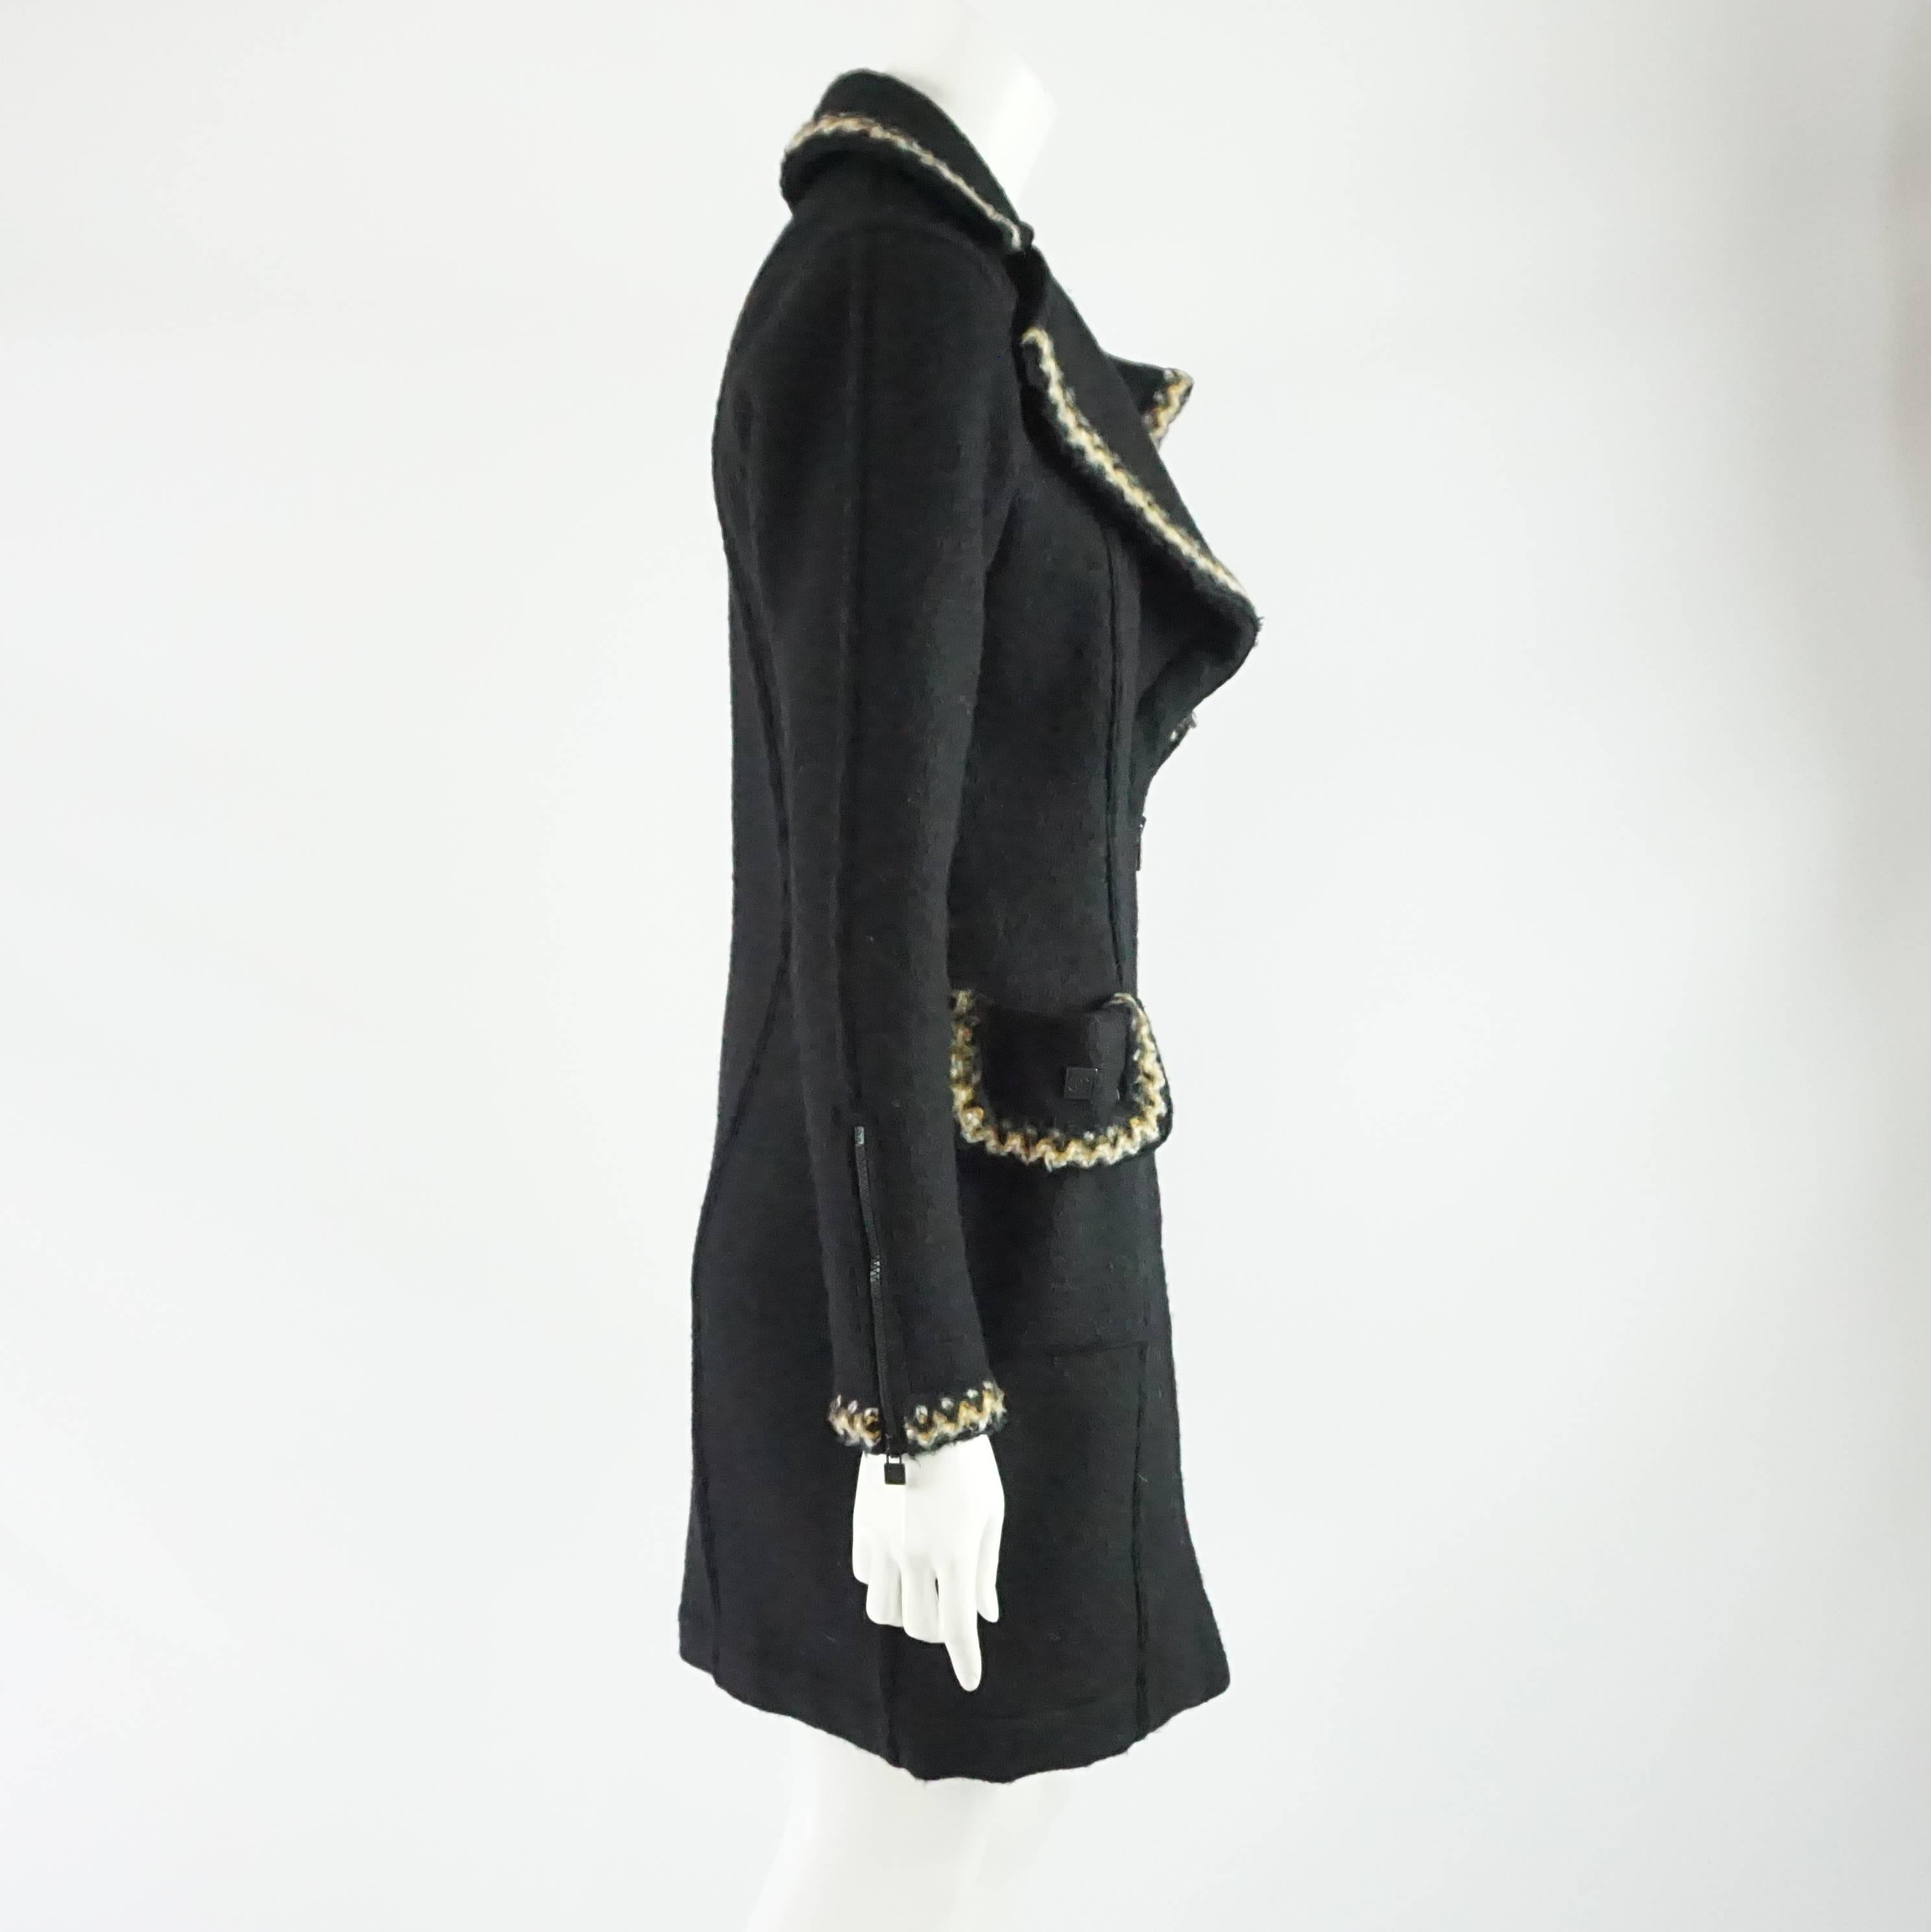 This Chanel black 3/4 coat is a wool-alcapa blend with a white and beige trim. The coat has a thick collar, 2 front double pockets, and black zipper closures. The coat is in good condition with some general wear to the fabric. Size 36,